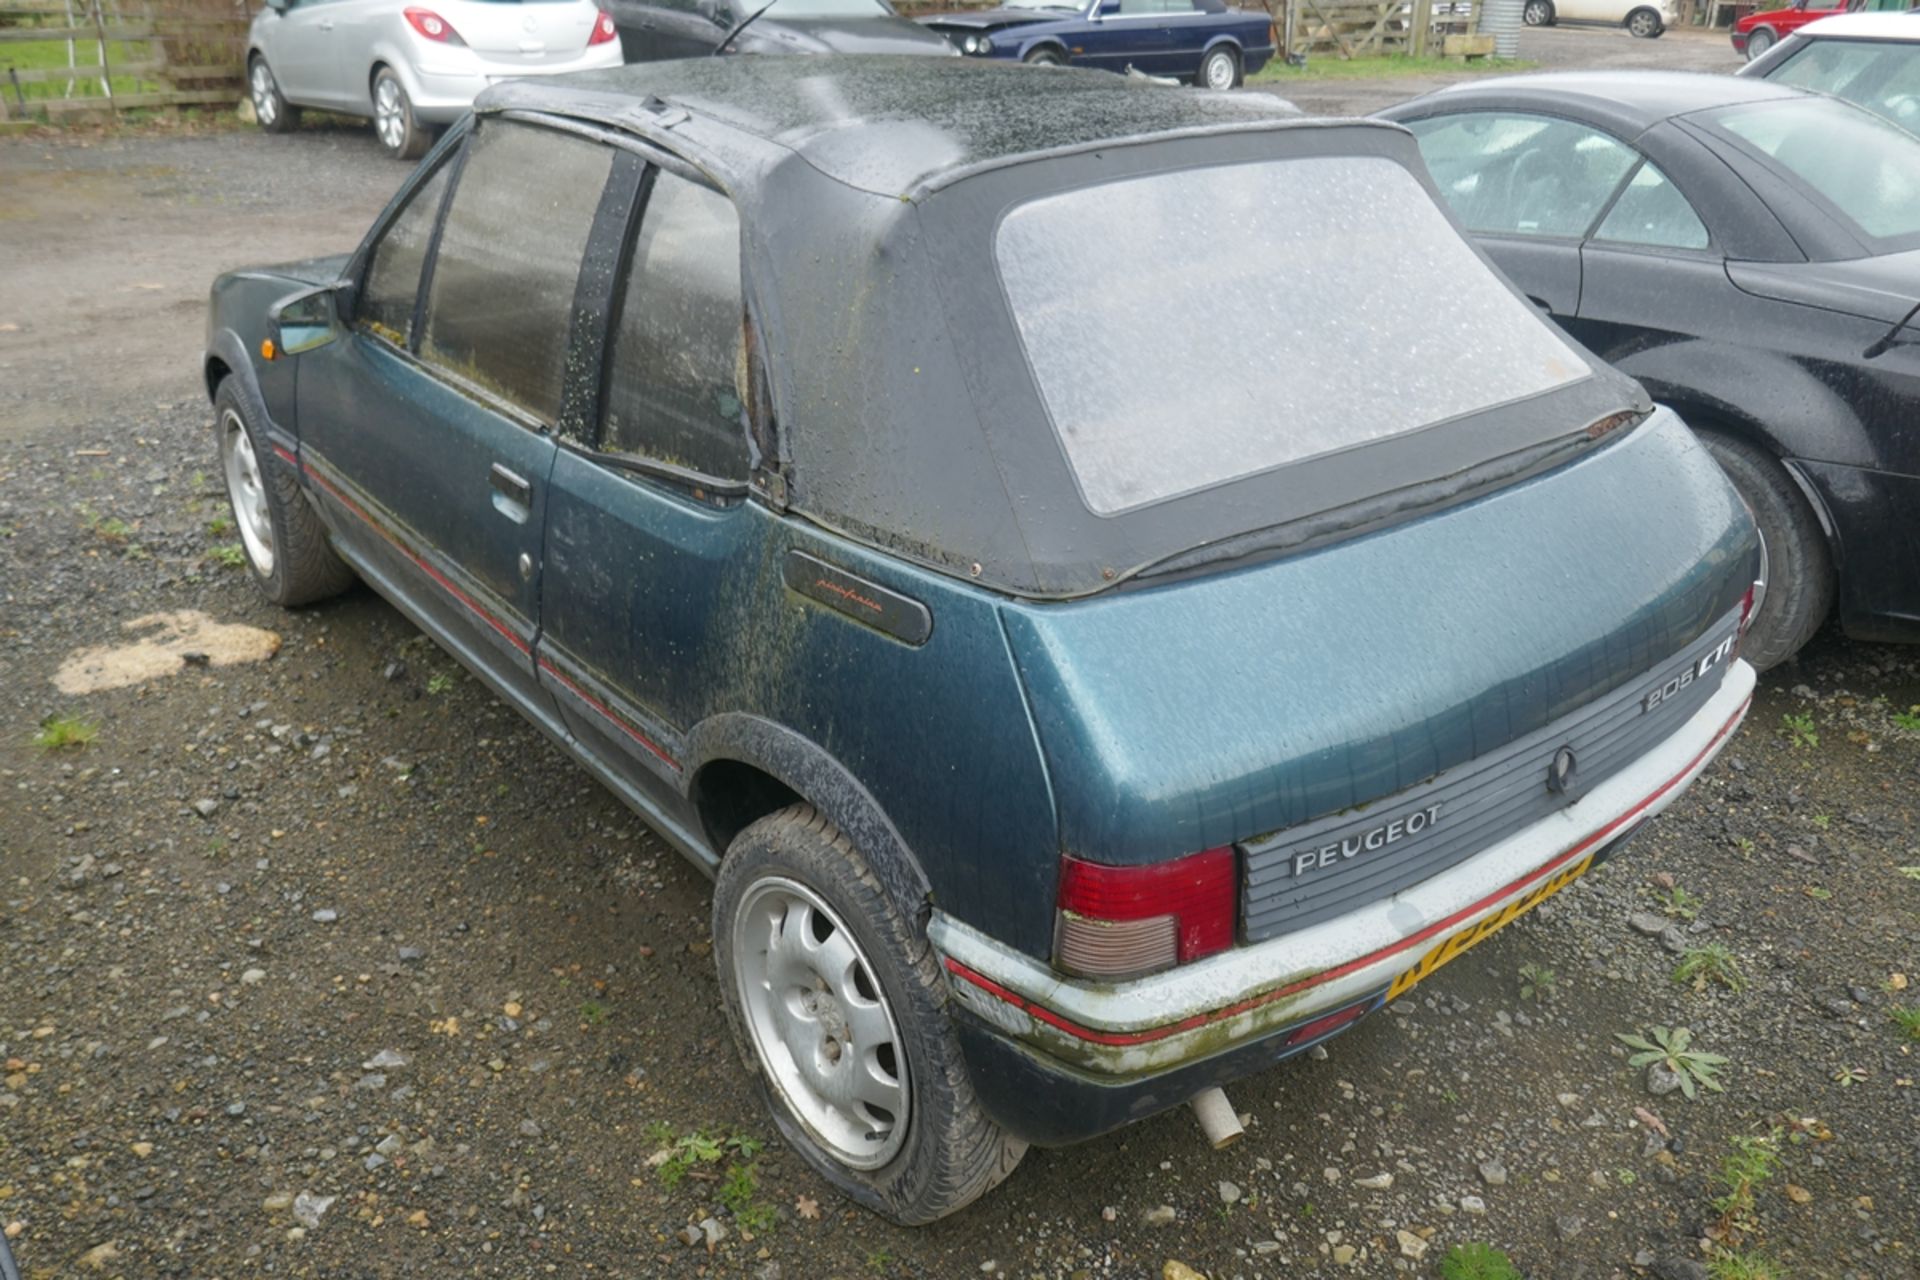 1992 K reg Peugeot 205 1.9 Cti barn find with just 58000 miles on the clock, no MOT - Image 4 of 11